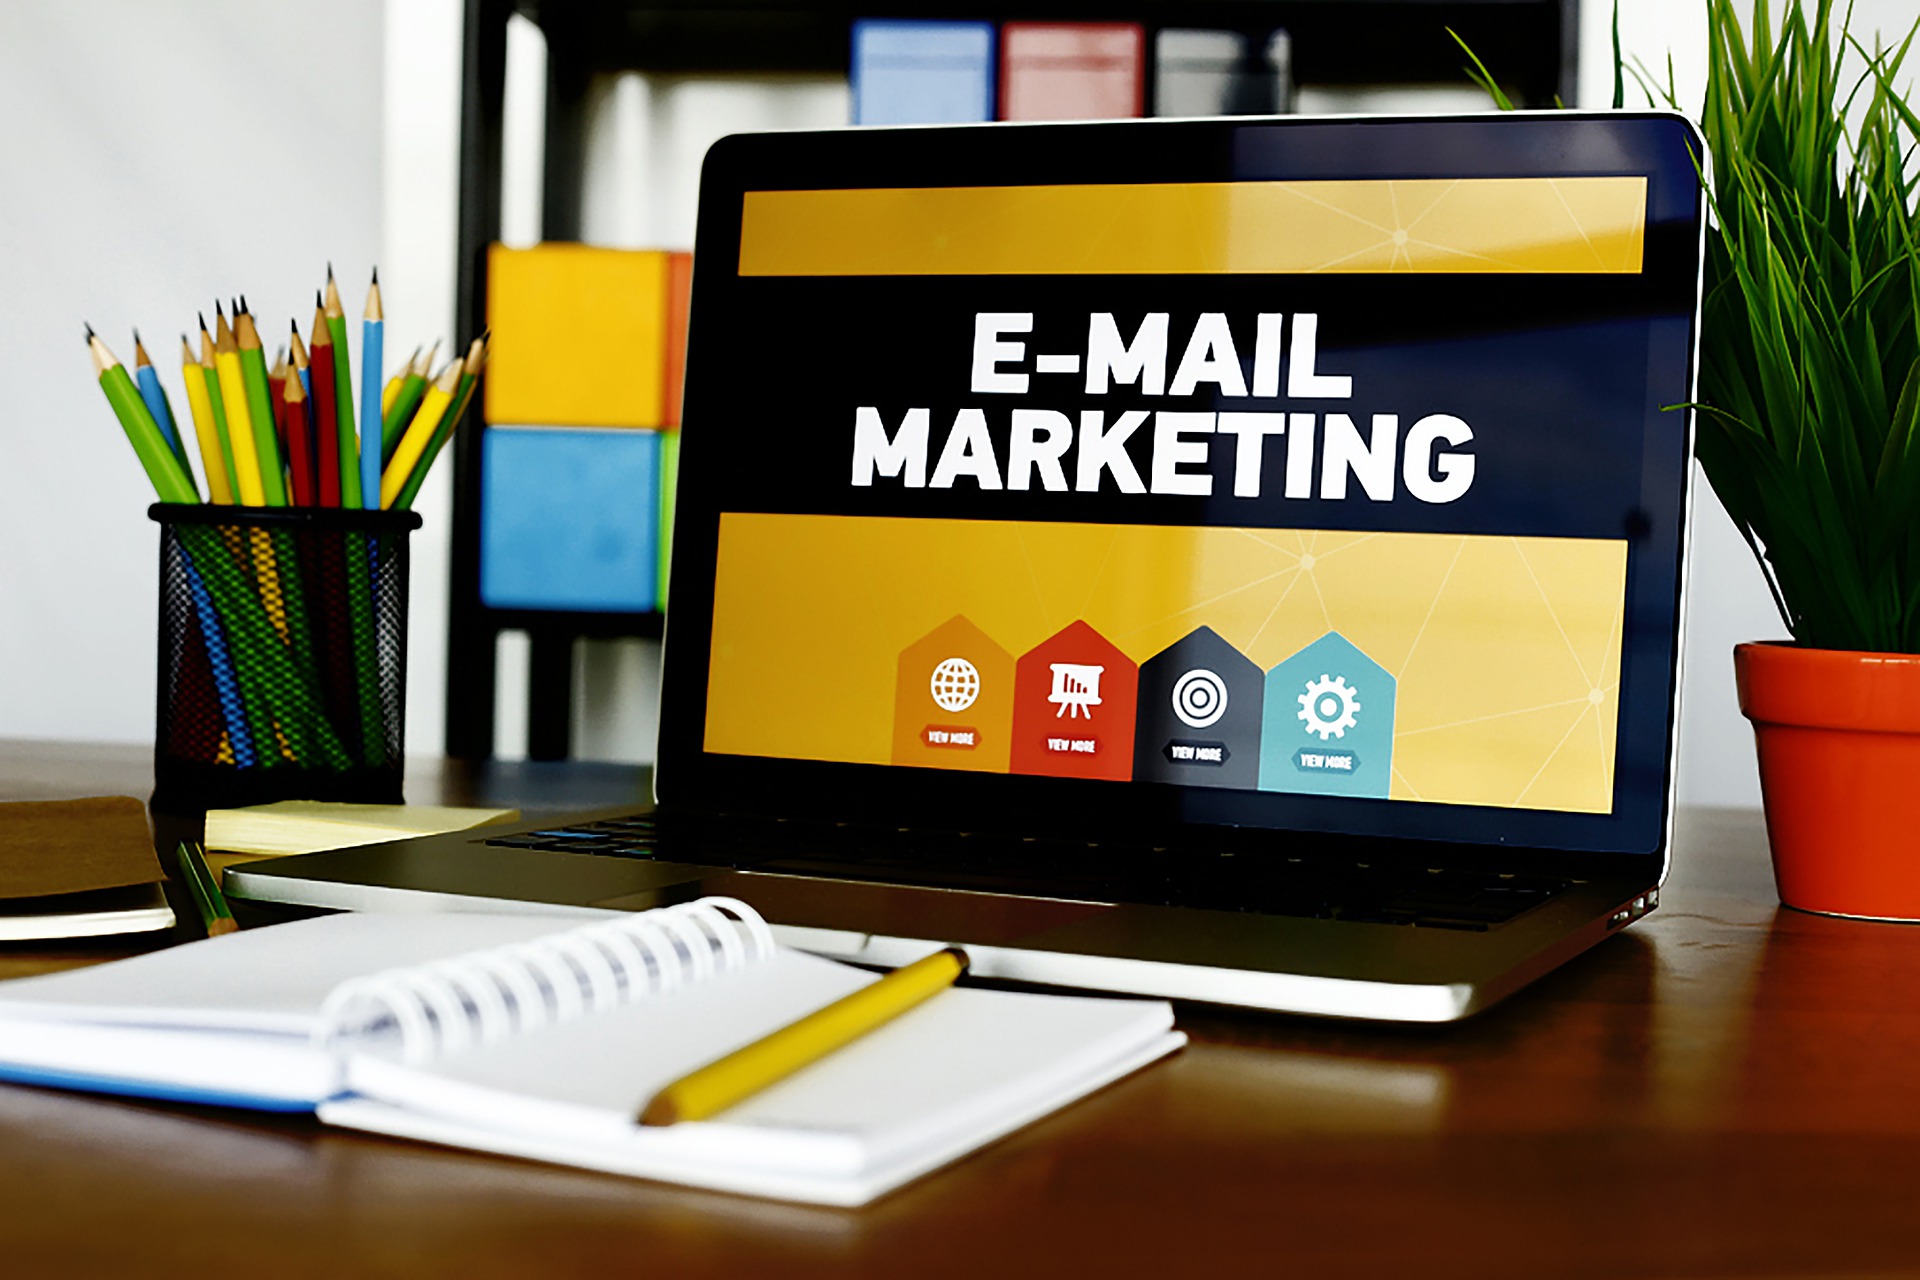 Email Marketing - Hints and Tips on What and What Not to do